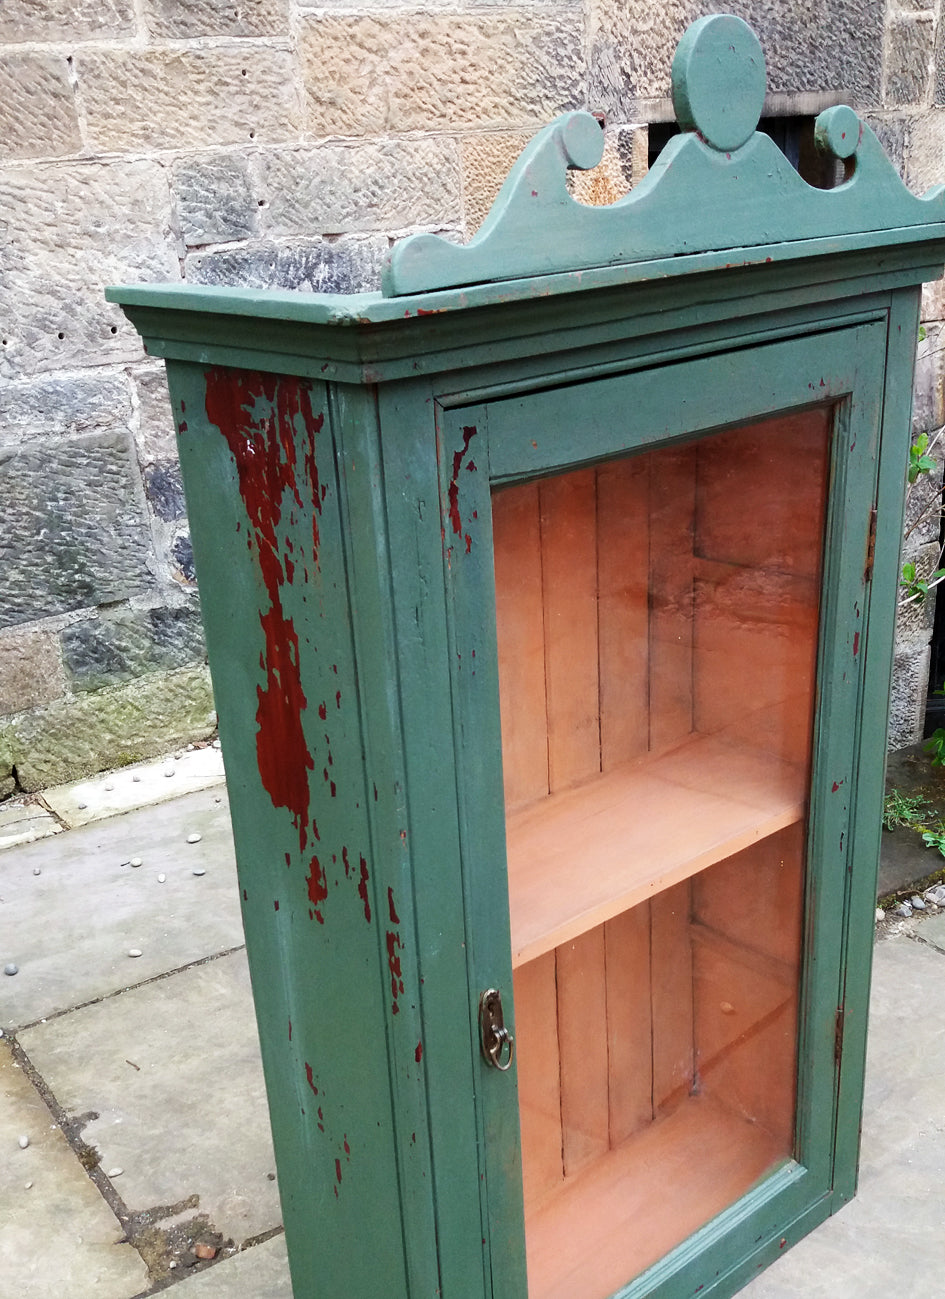 Vintage glass fronted cabinet in an antique chippy milk paint finish